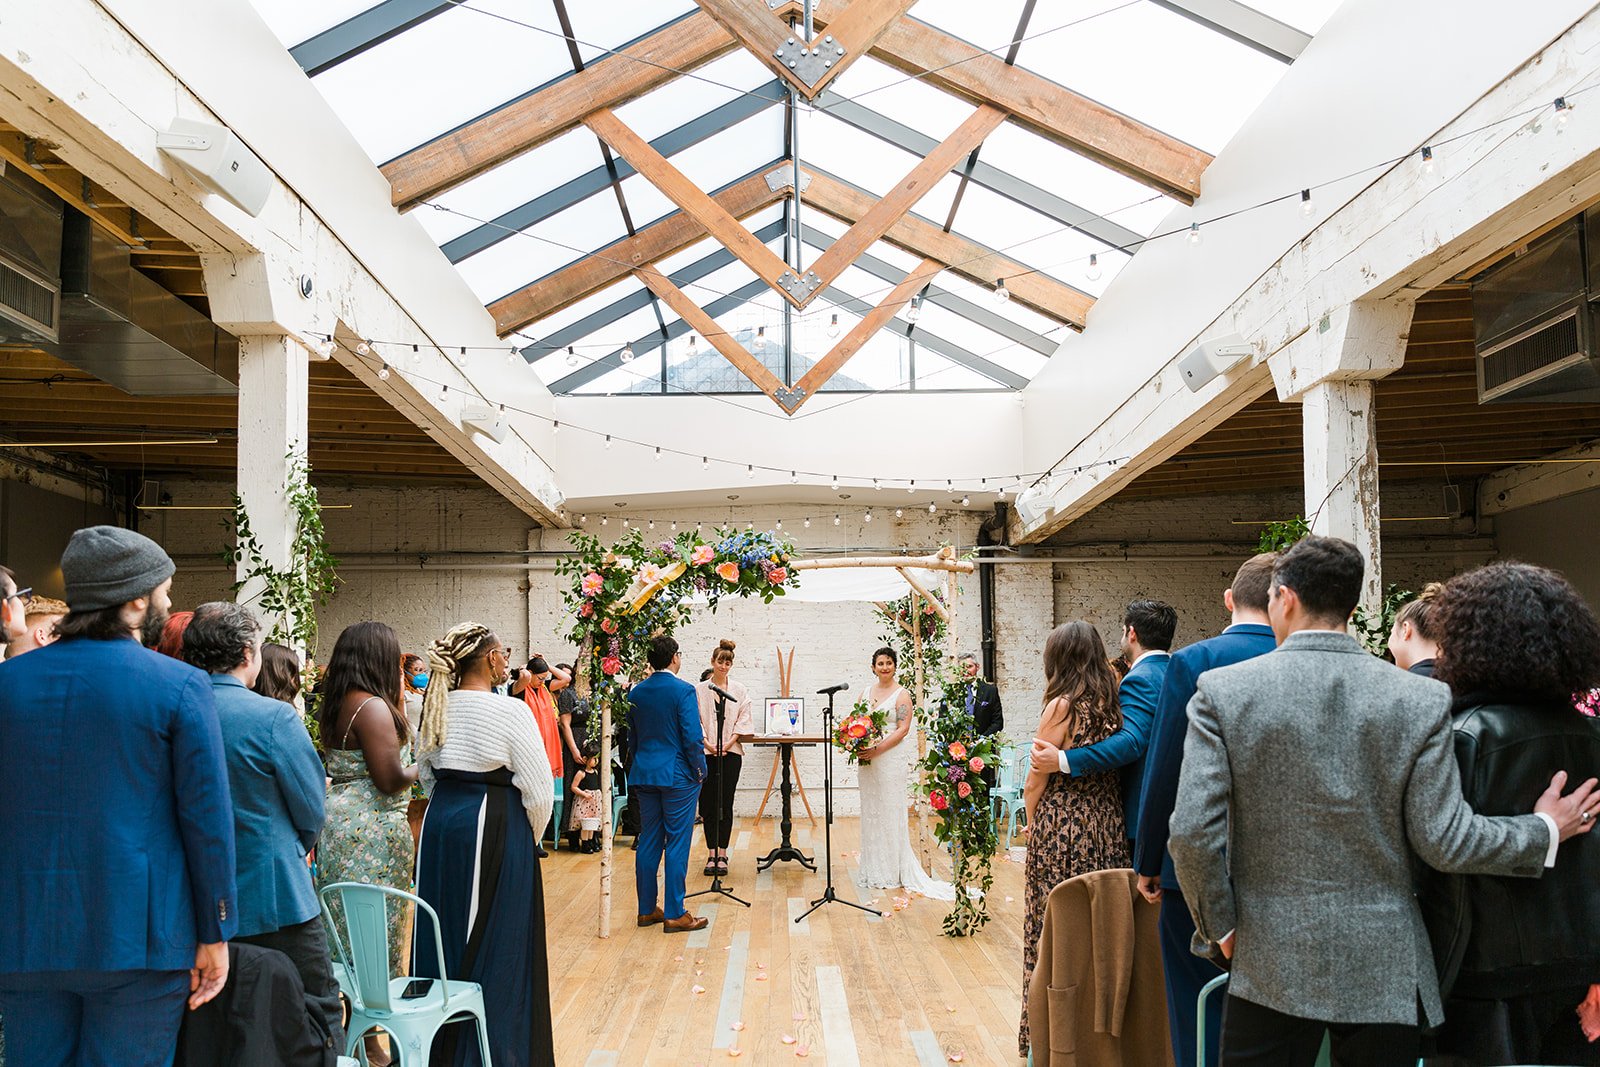  Candid, documentary wide photo bride and groom under chupah surrounded by guests during their nontraditional Jewish and Venezuelan wedding ceremony in the round at The Joinery Chicago an Industrial loft wedding venue In Logan Square. 